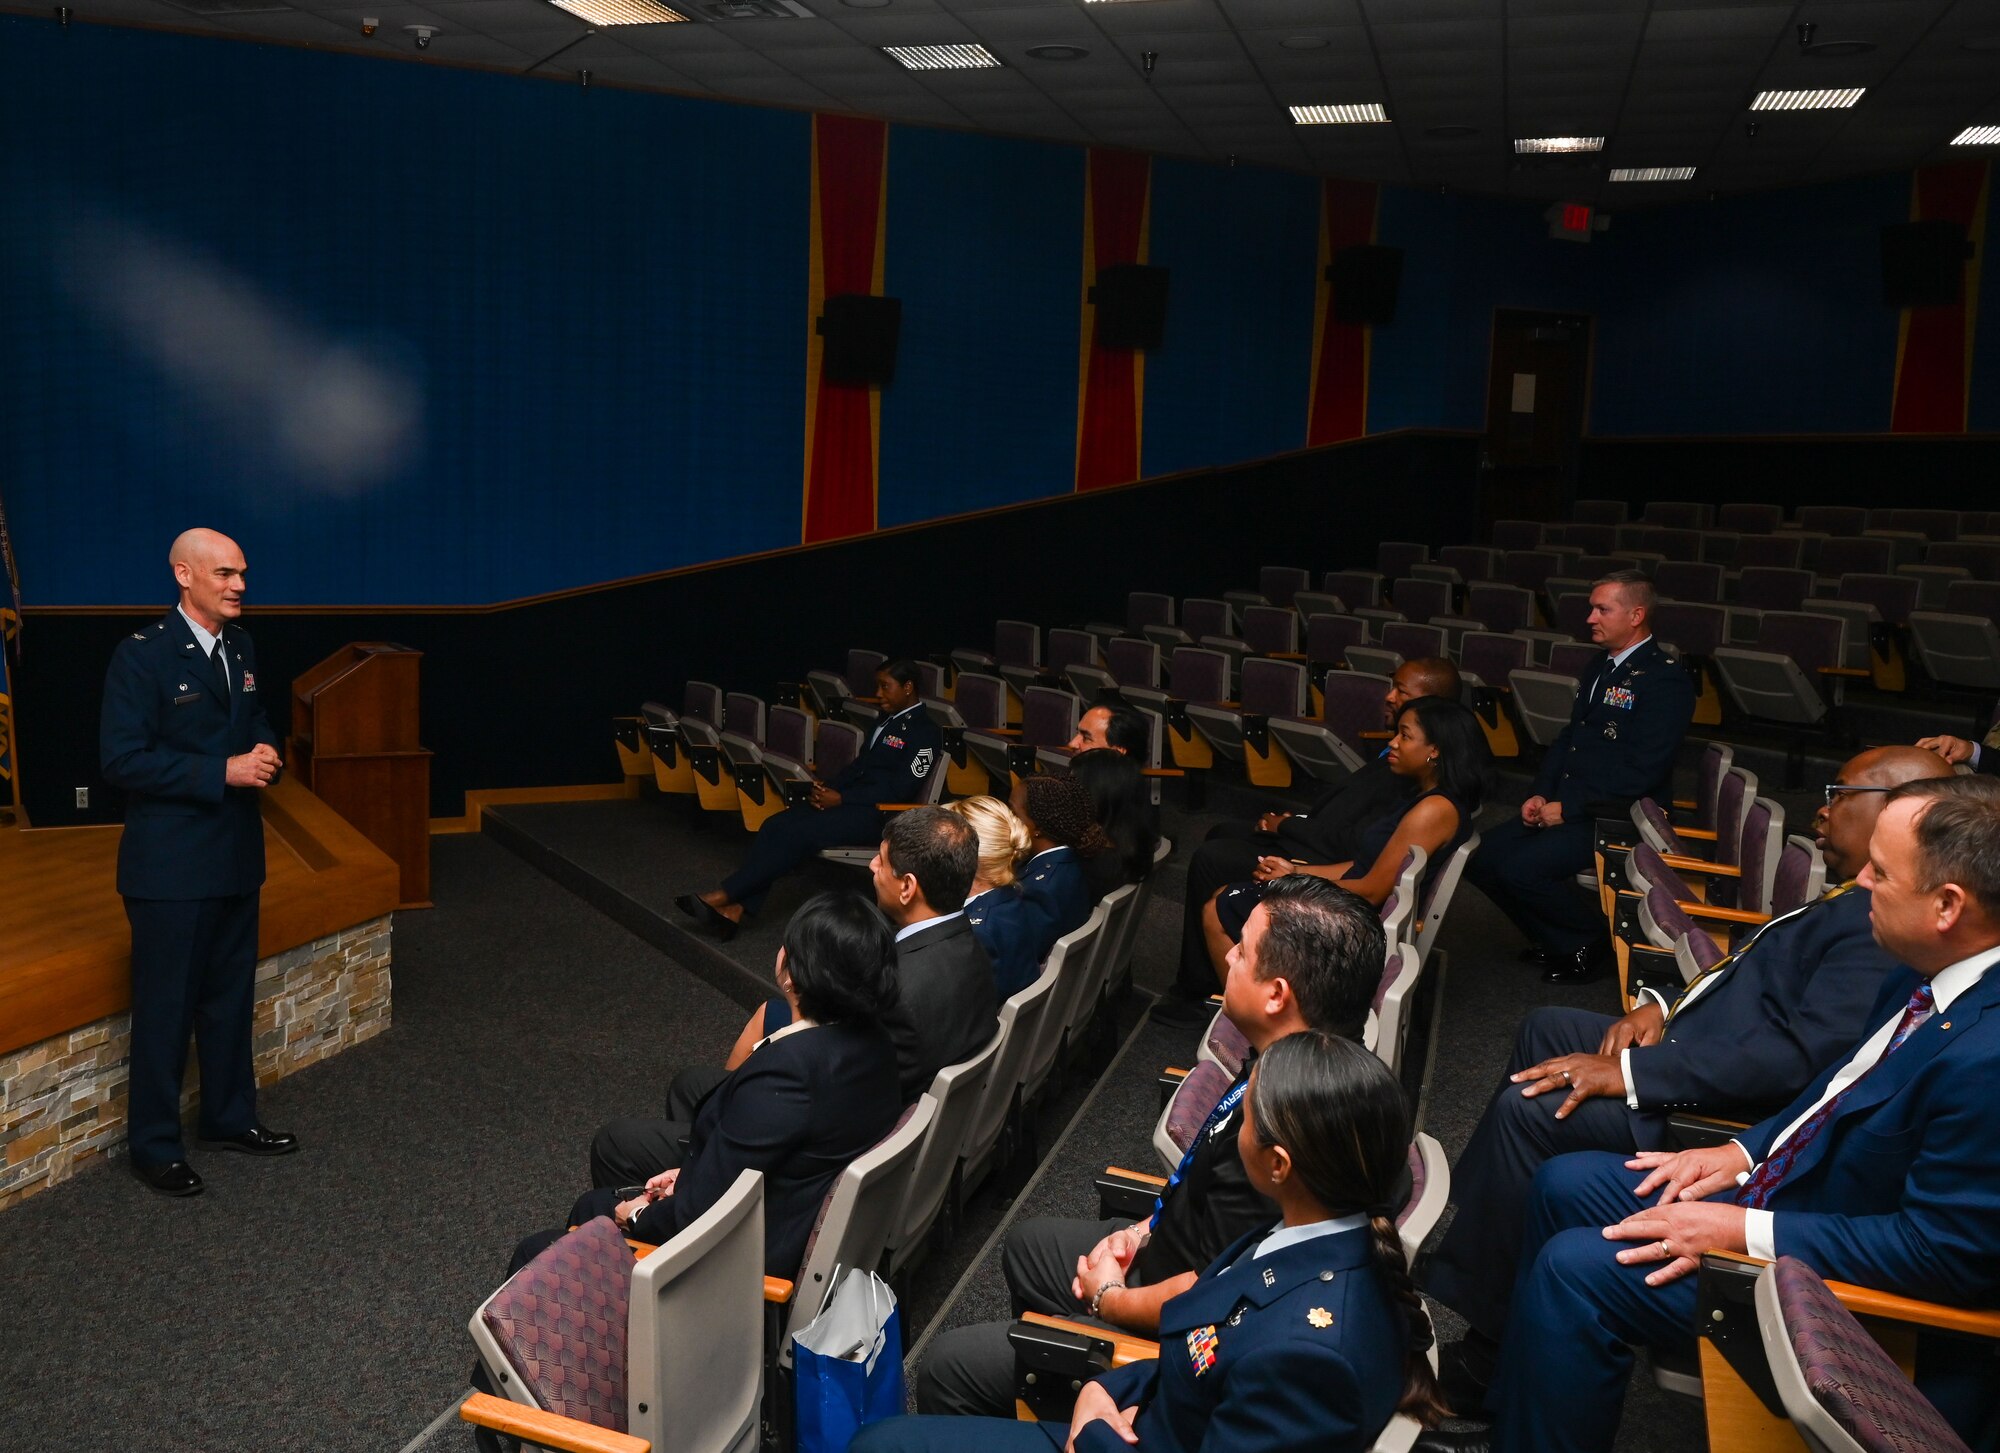 Col. William Gutermuth, 433rd Airlift Wing commander, delivers opening remarks to attendees during the Honorary Commanders’ Induction Ceremony at Joint Base San Antonio-Lackland, Texas, Oct. 15, 2023. Honorary commanders have opportunities to learn about their units and commanders through C-5M Super Galaxy tours, demonstrations, events and flights.